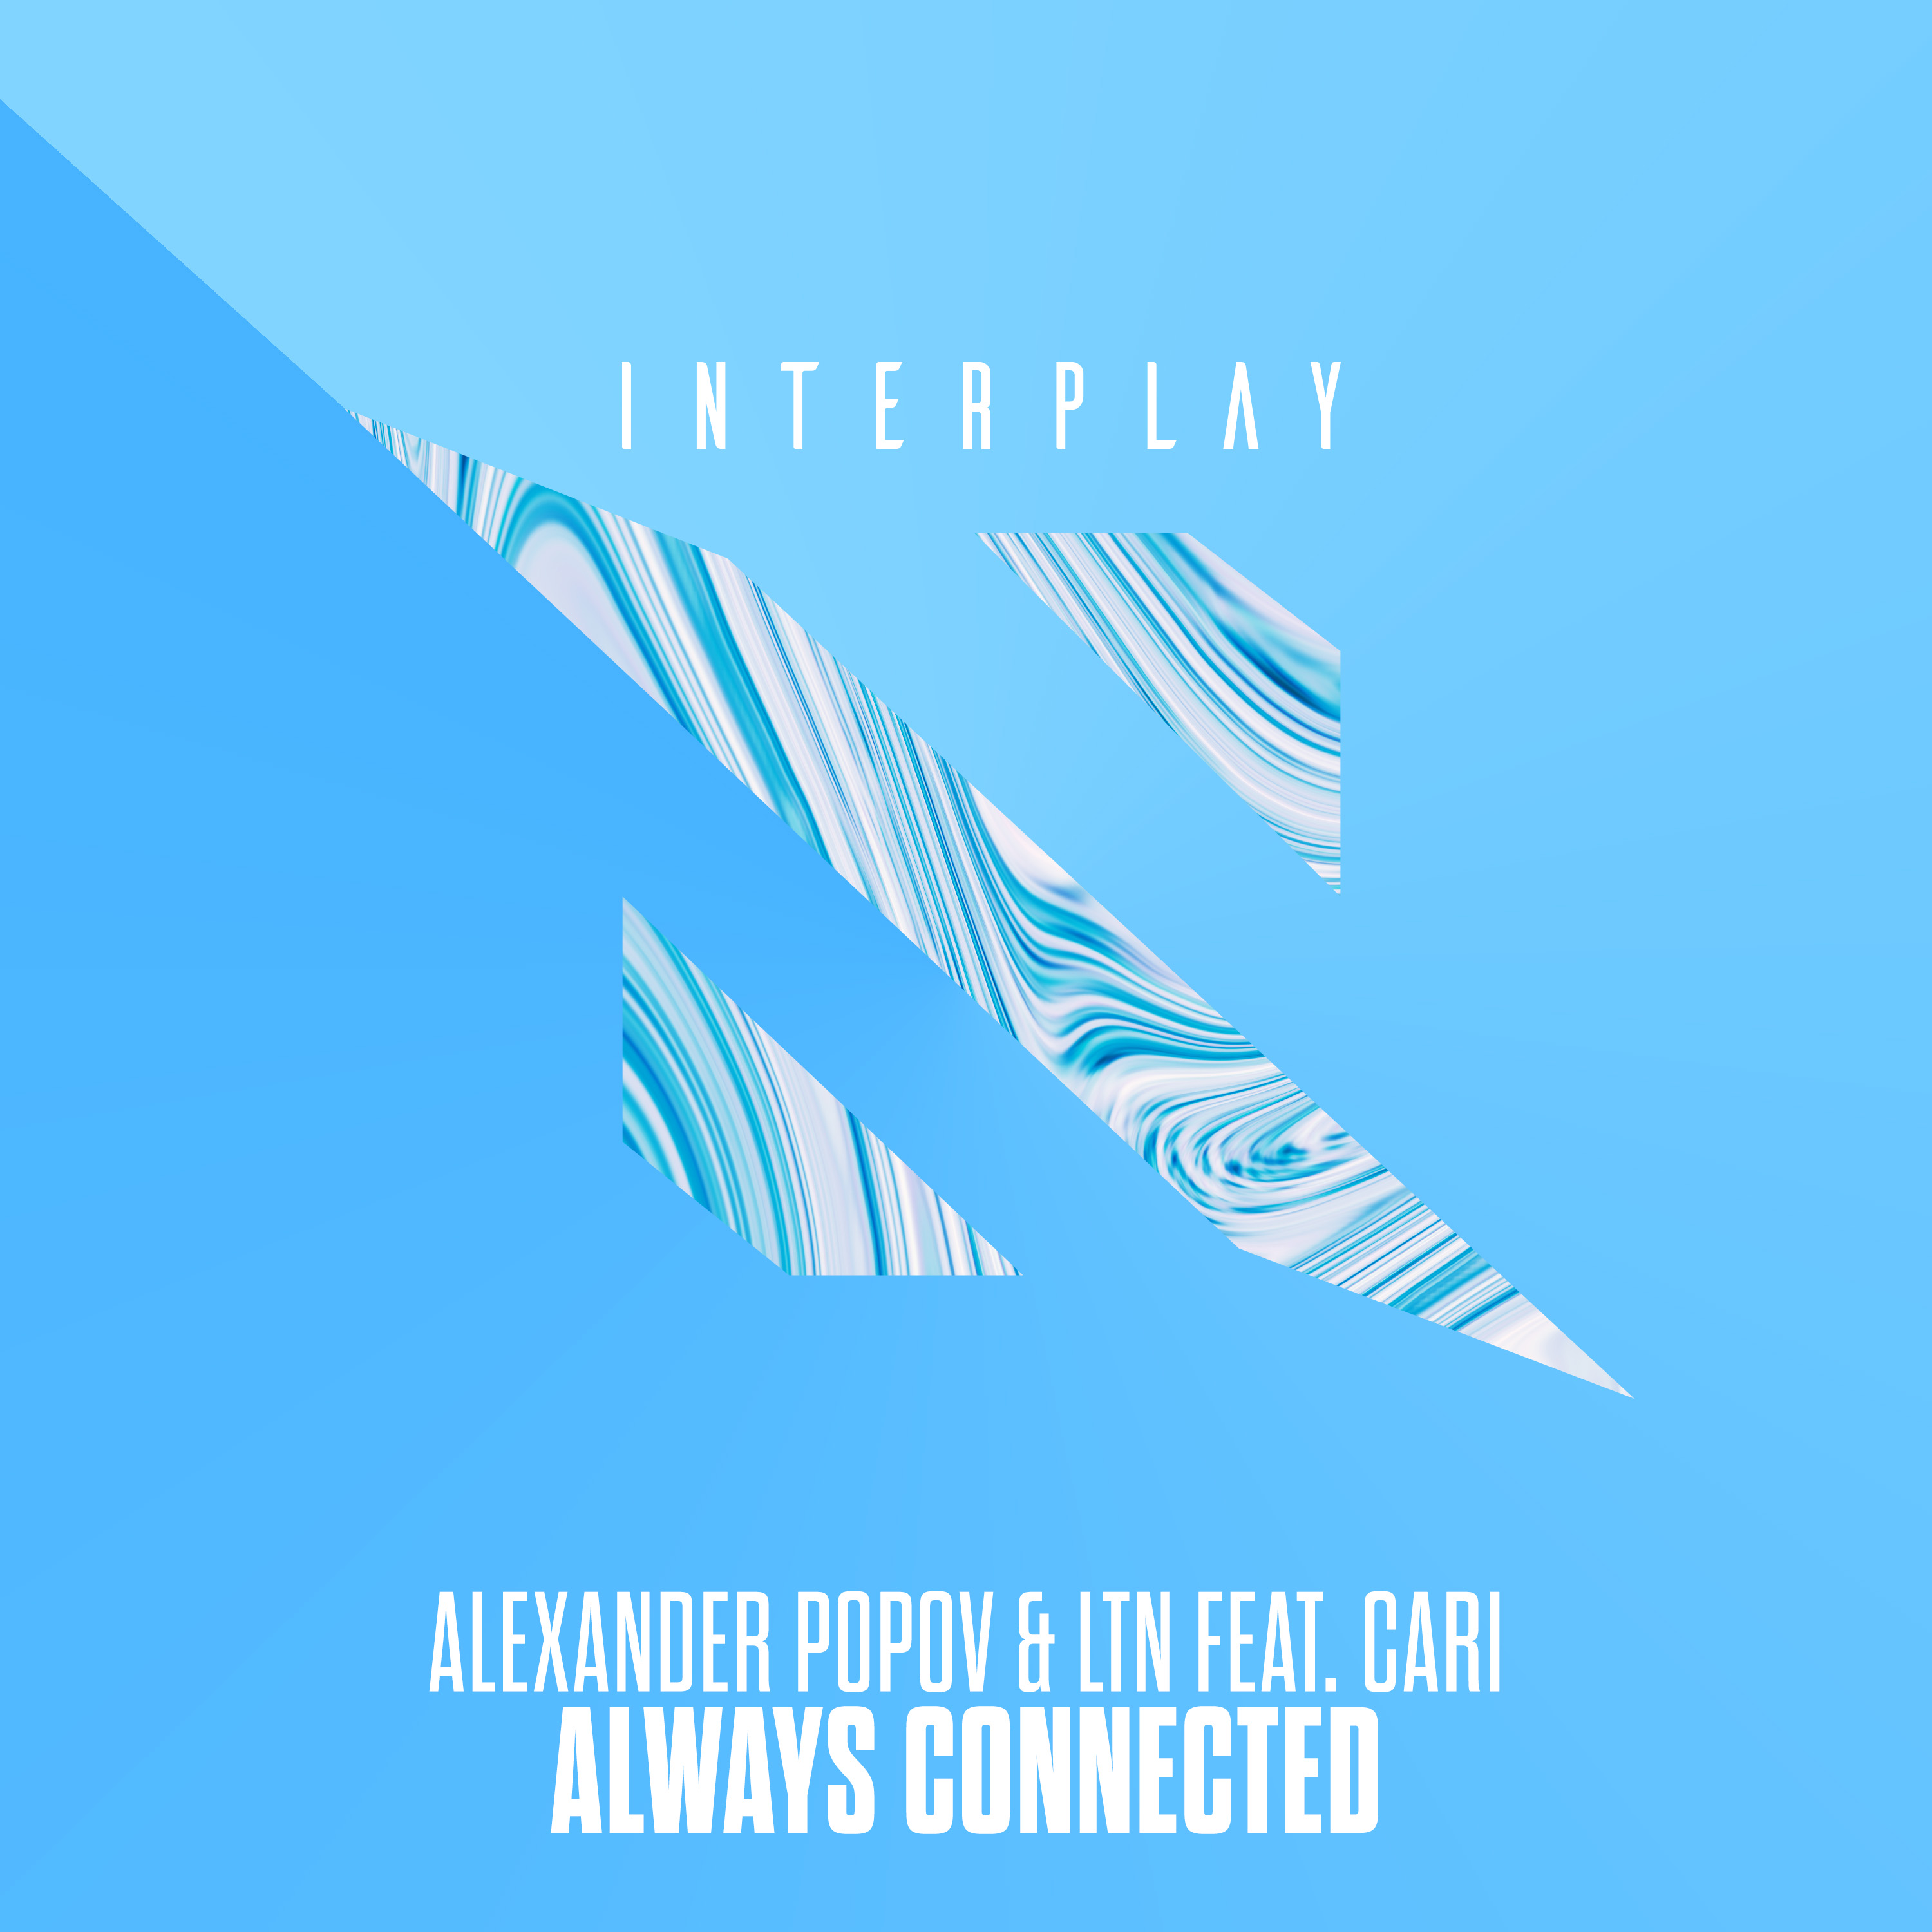 Alexander Popov and LTN feat. Cari presents Always Connected on Interplay